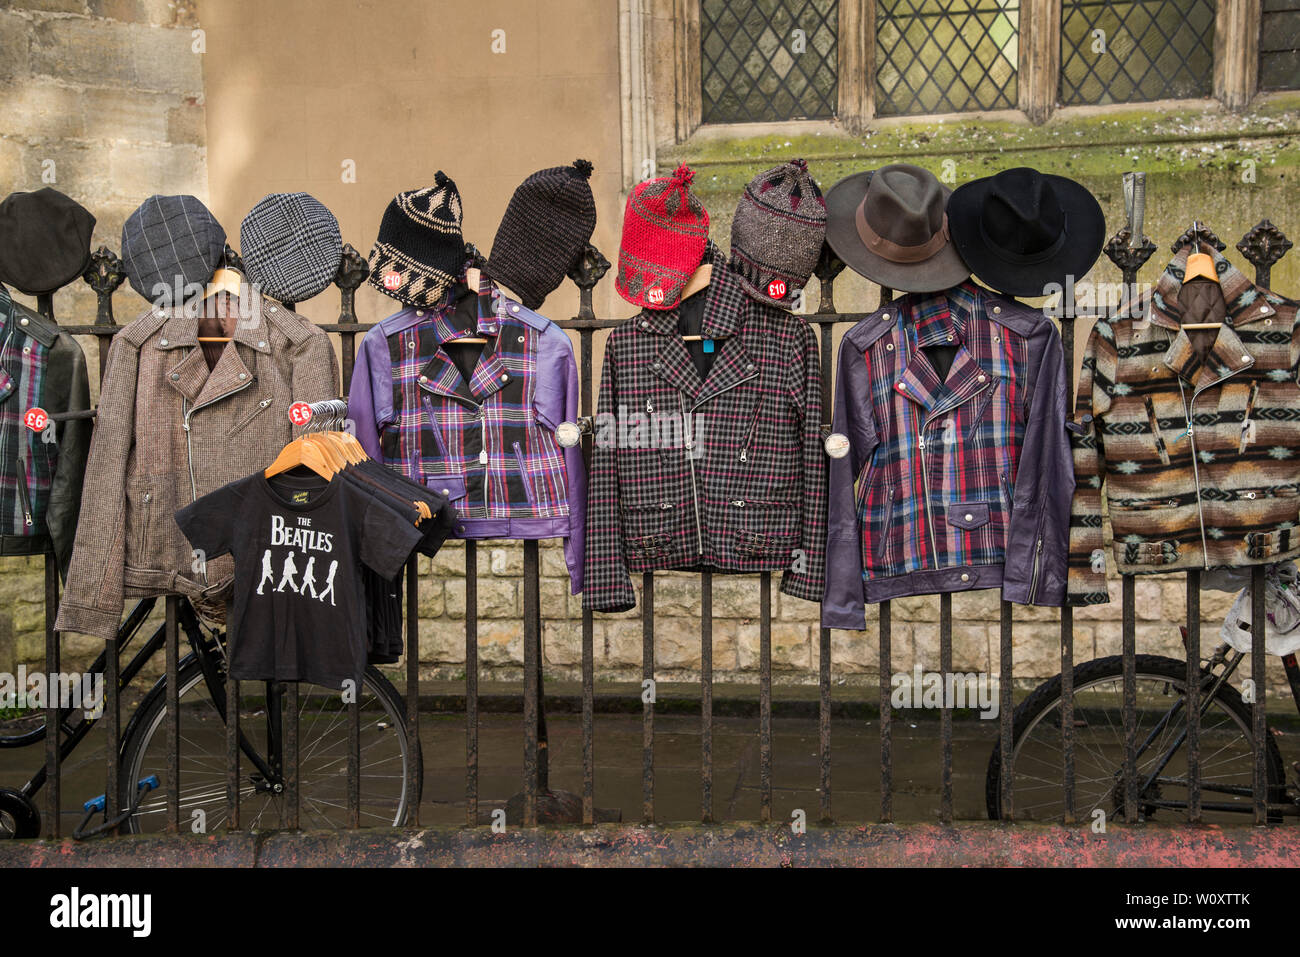 A clothes seller uses the railings outside St Andrew the Great Church to disply his wares in central Cambridge 2019 Stock Photo